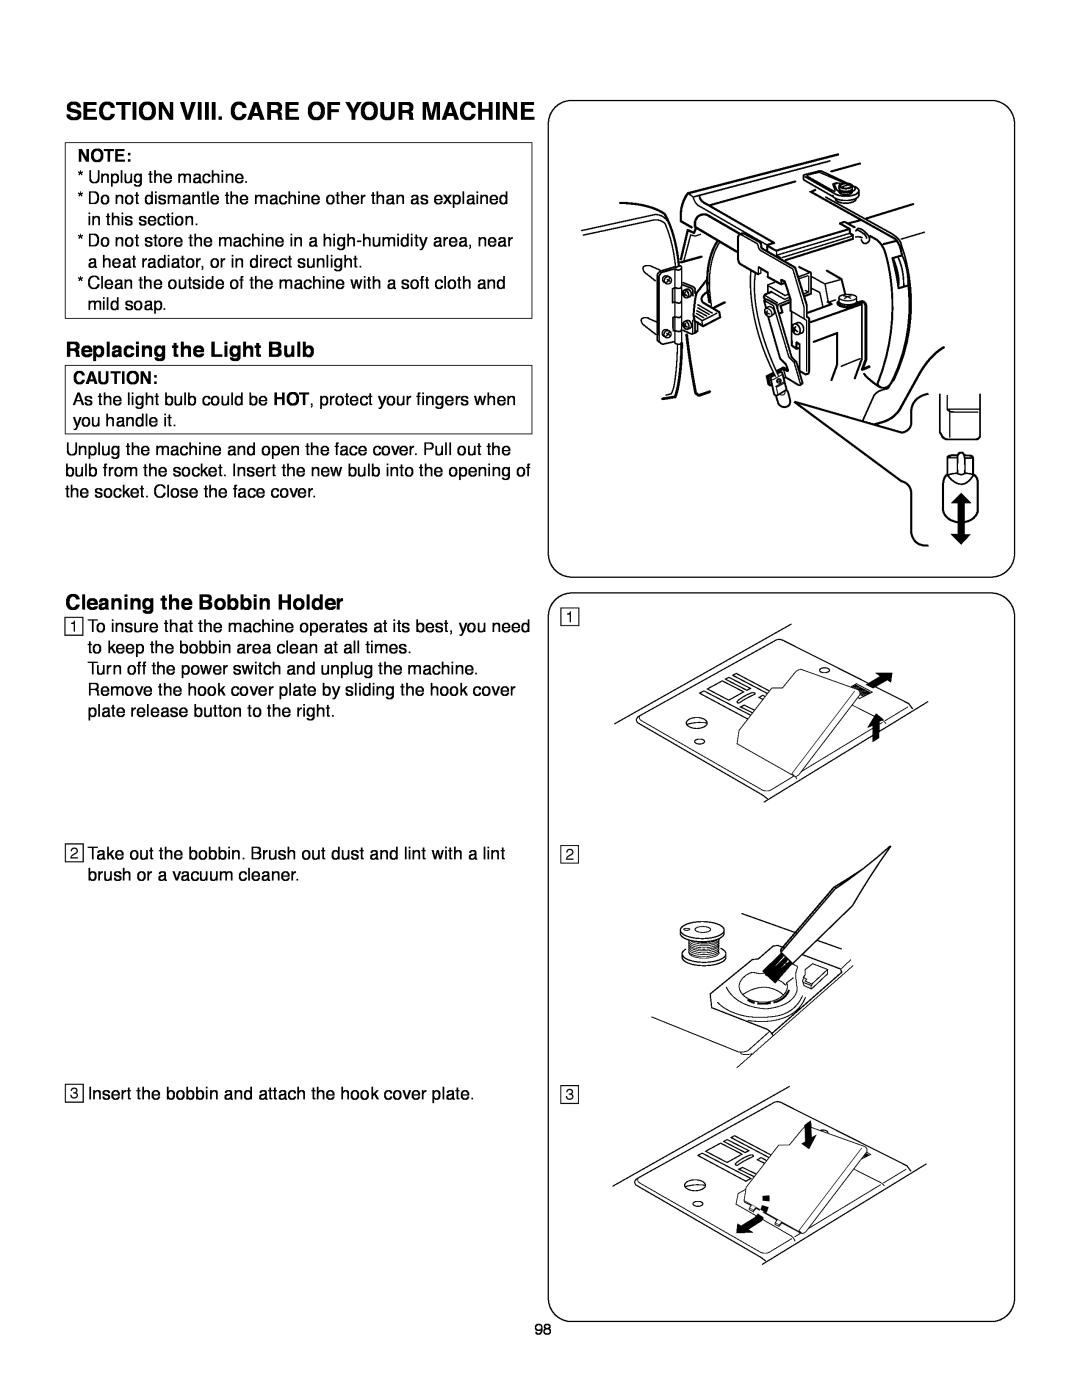 Janome MS-5027 instruction manual Section Viii. Care Of Your Machine, Replacing the Light Bulb, Cleaning the Bobbin Holder 